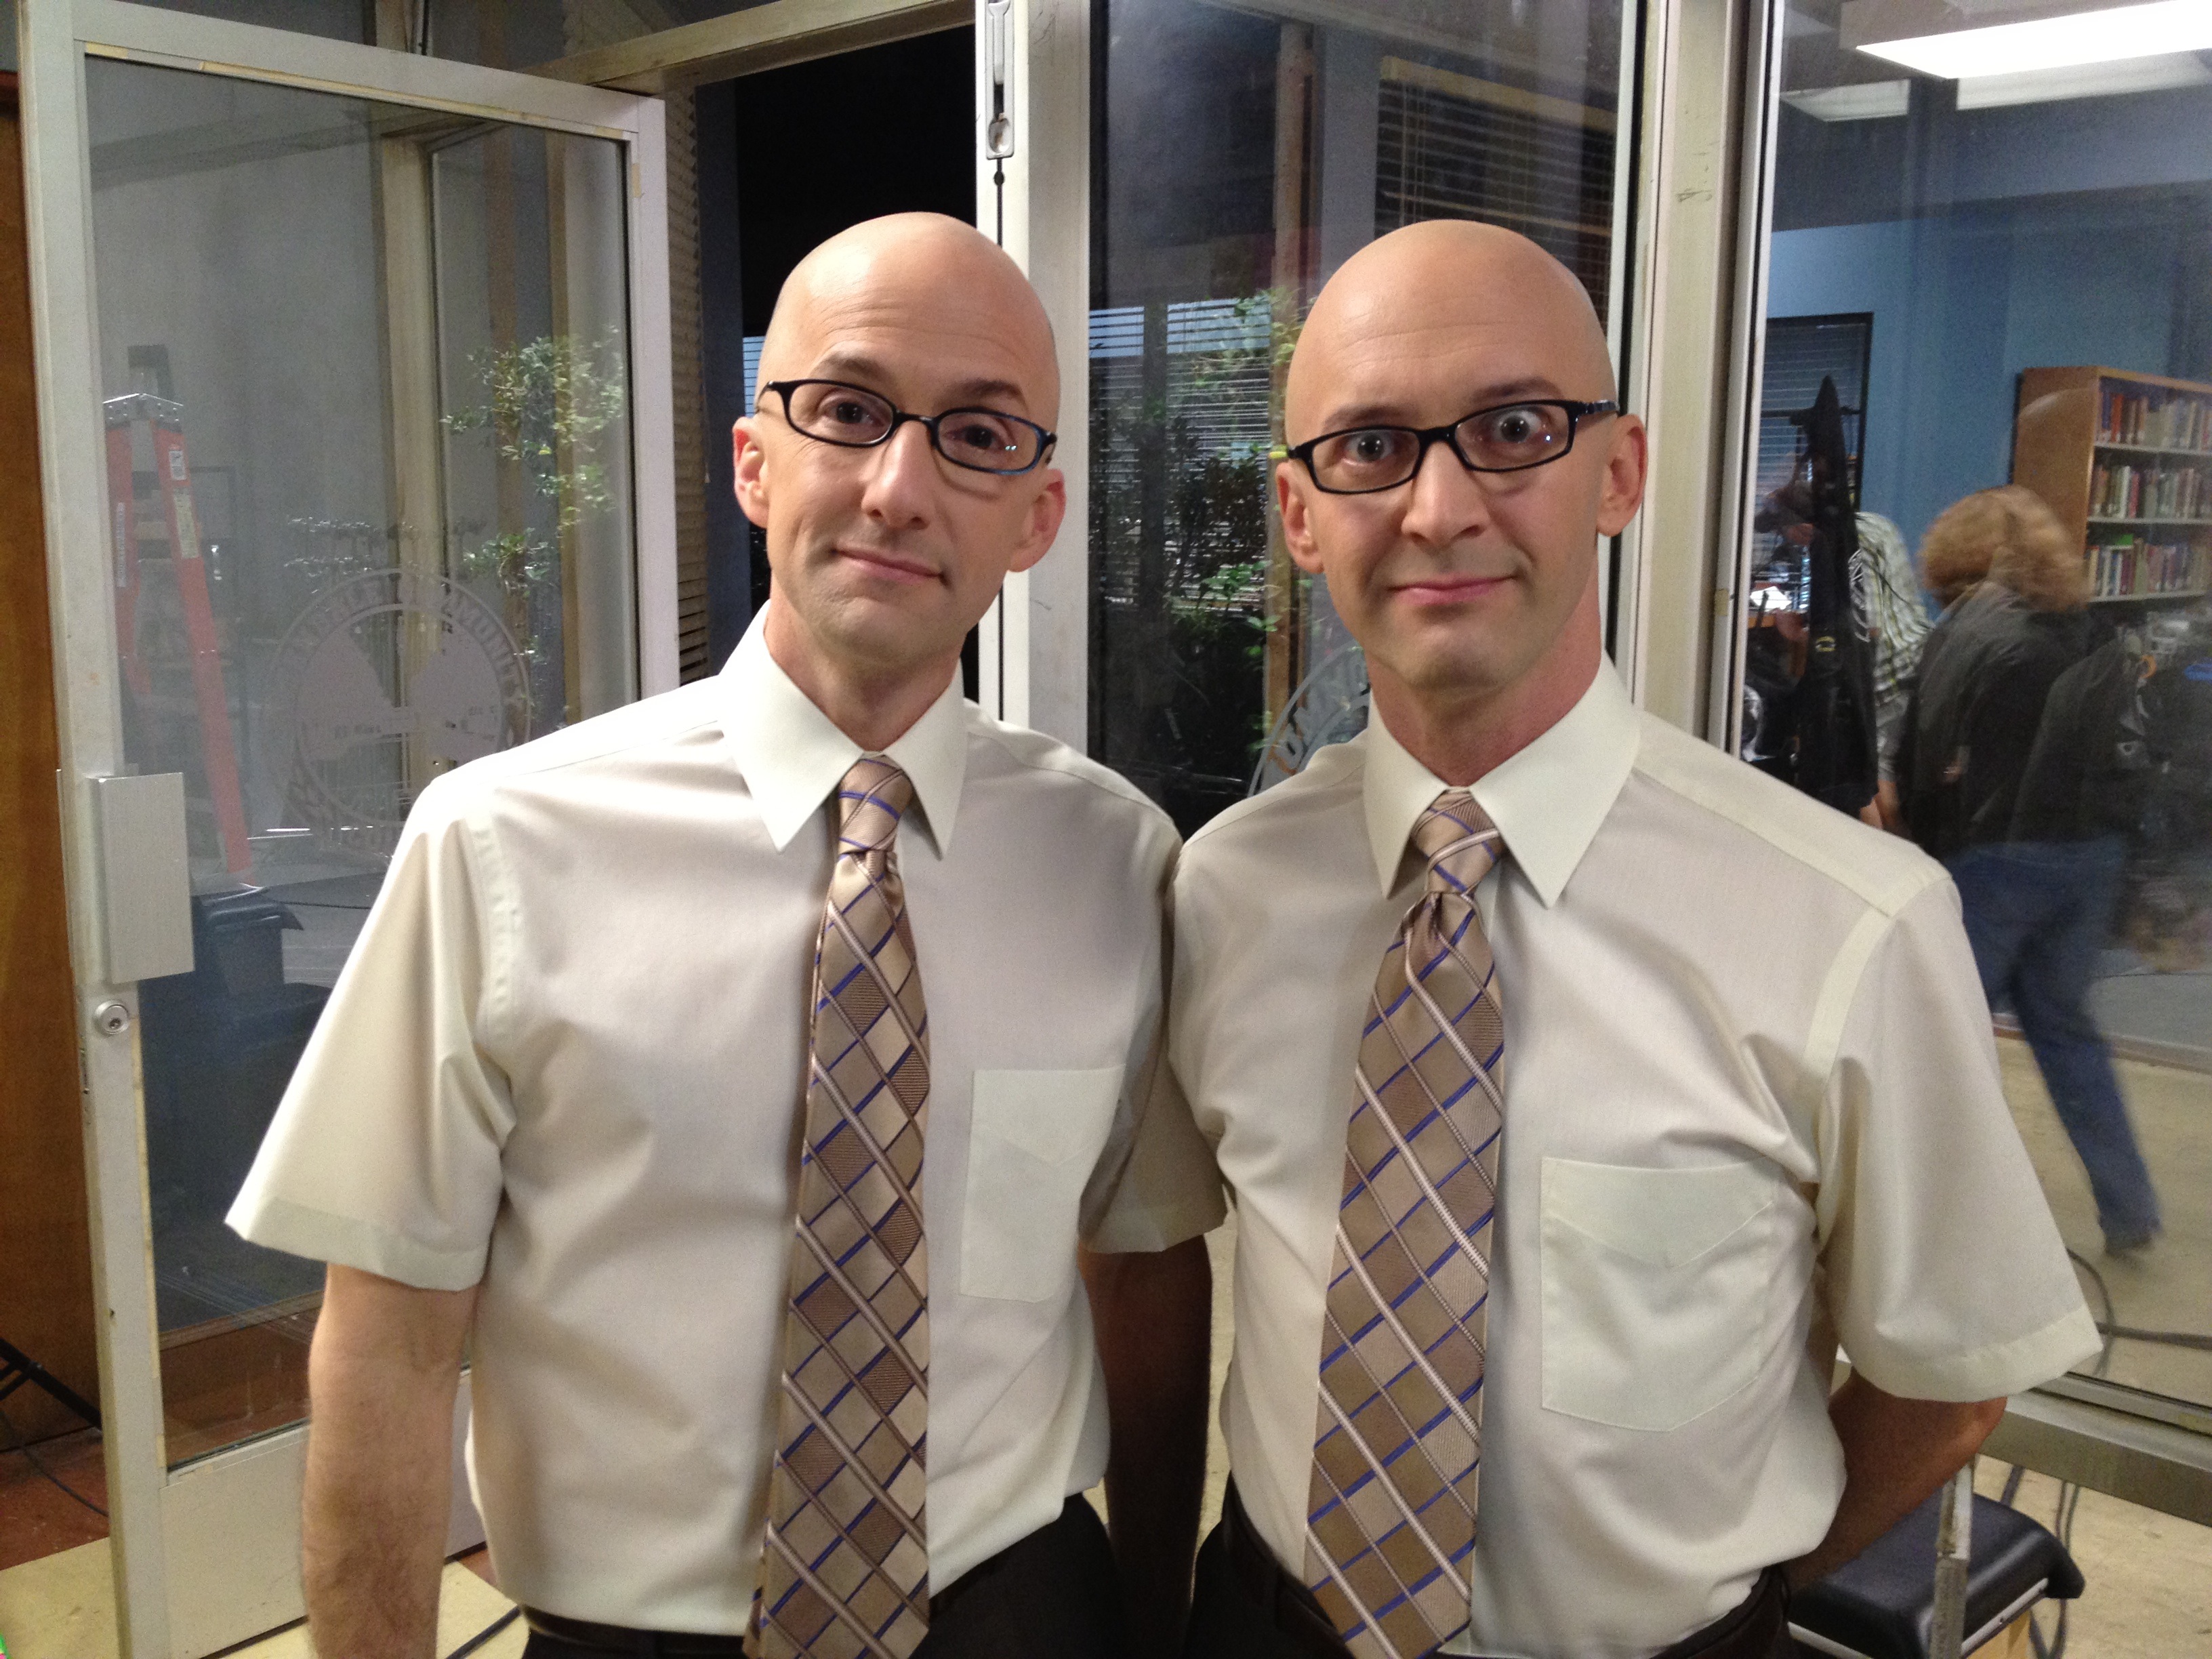 Jim Rash and J.P. Manoux as Dean and Doppeldeaner from 